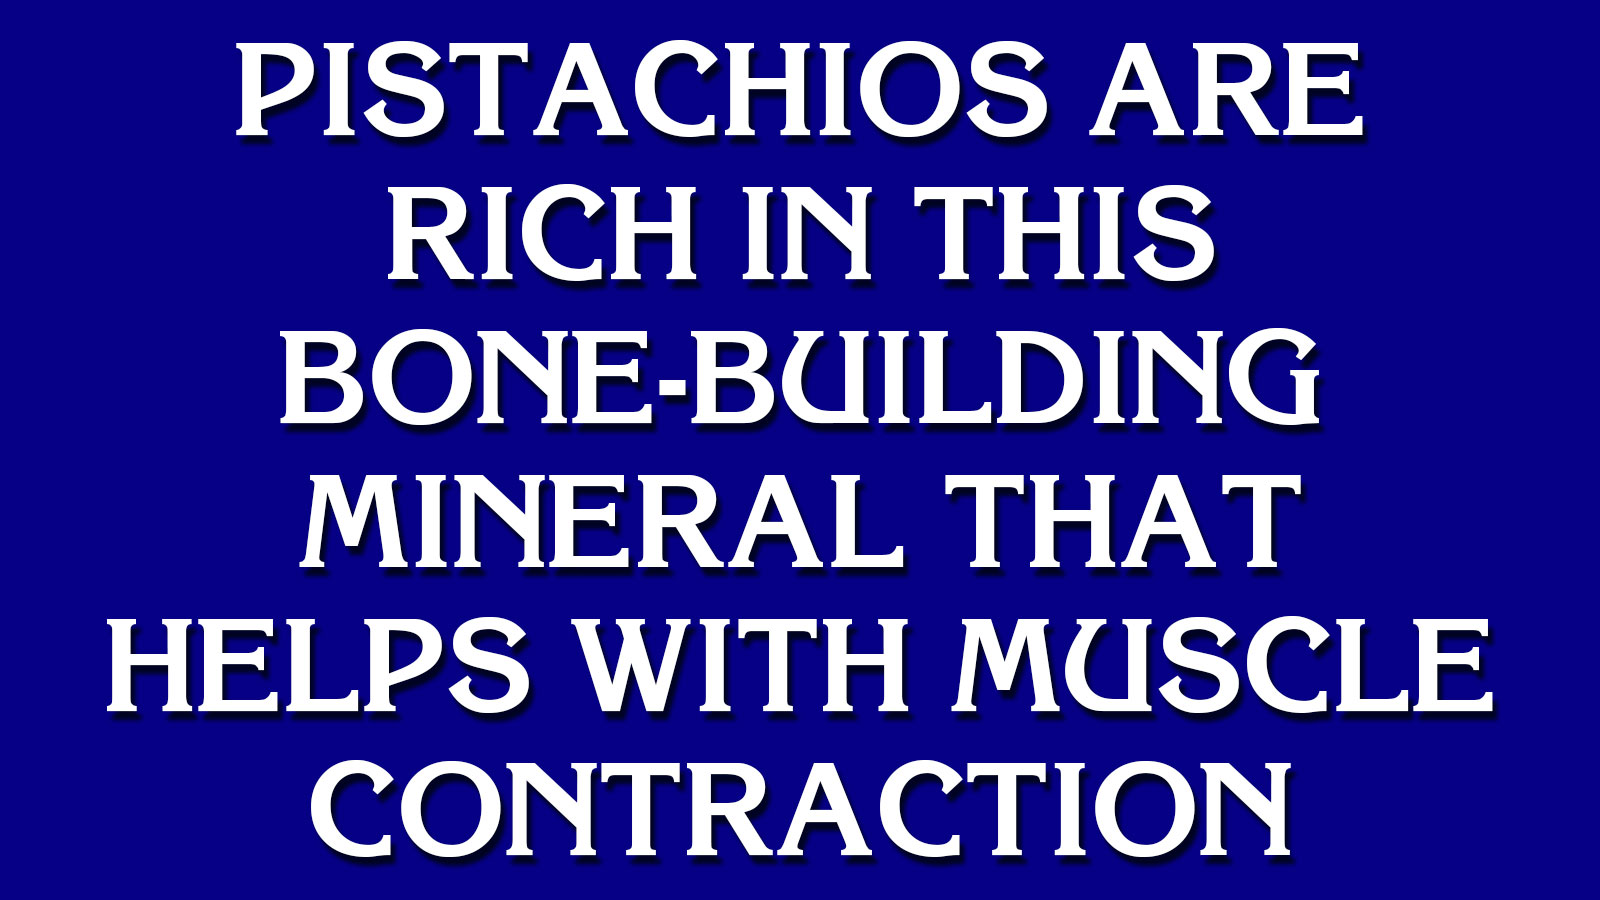 Can You Go on “Jeopardy!”? 83